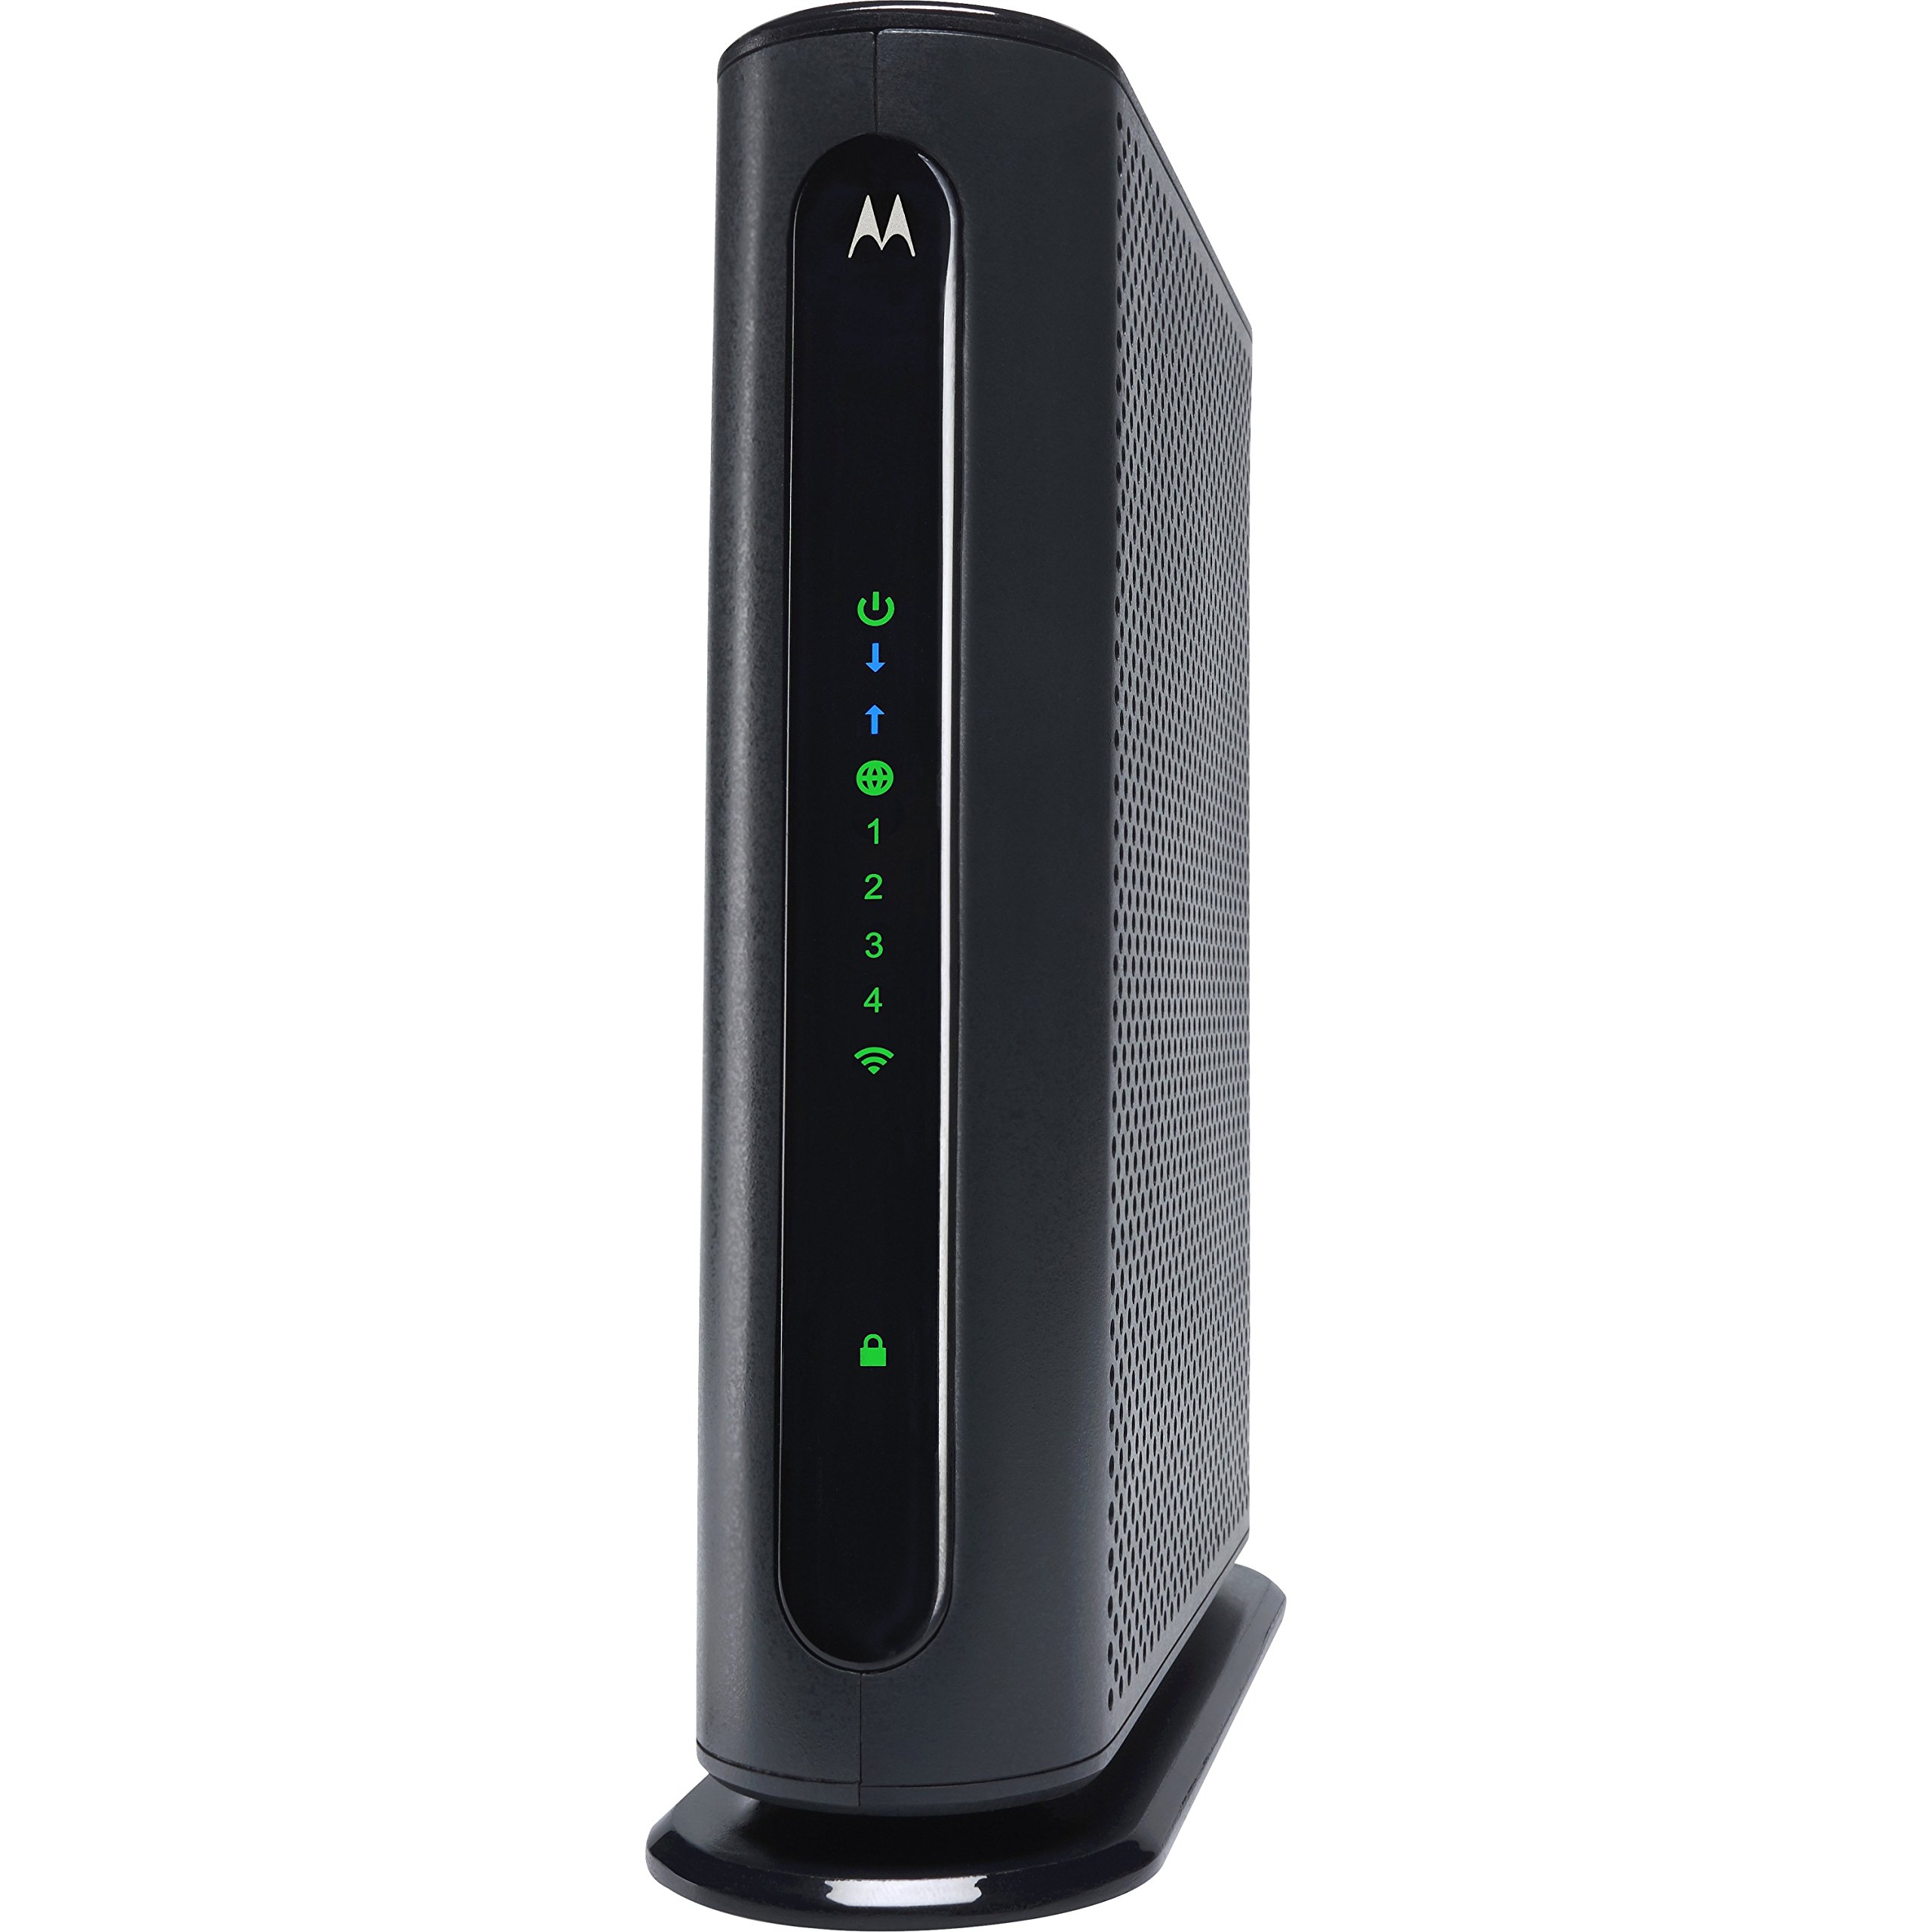 Cable Modem Plus N300 Router MG7310